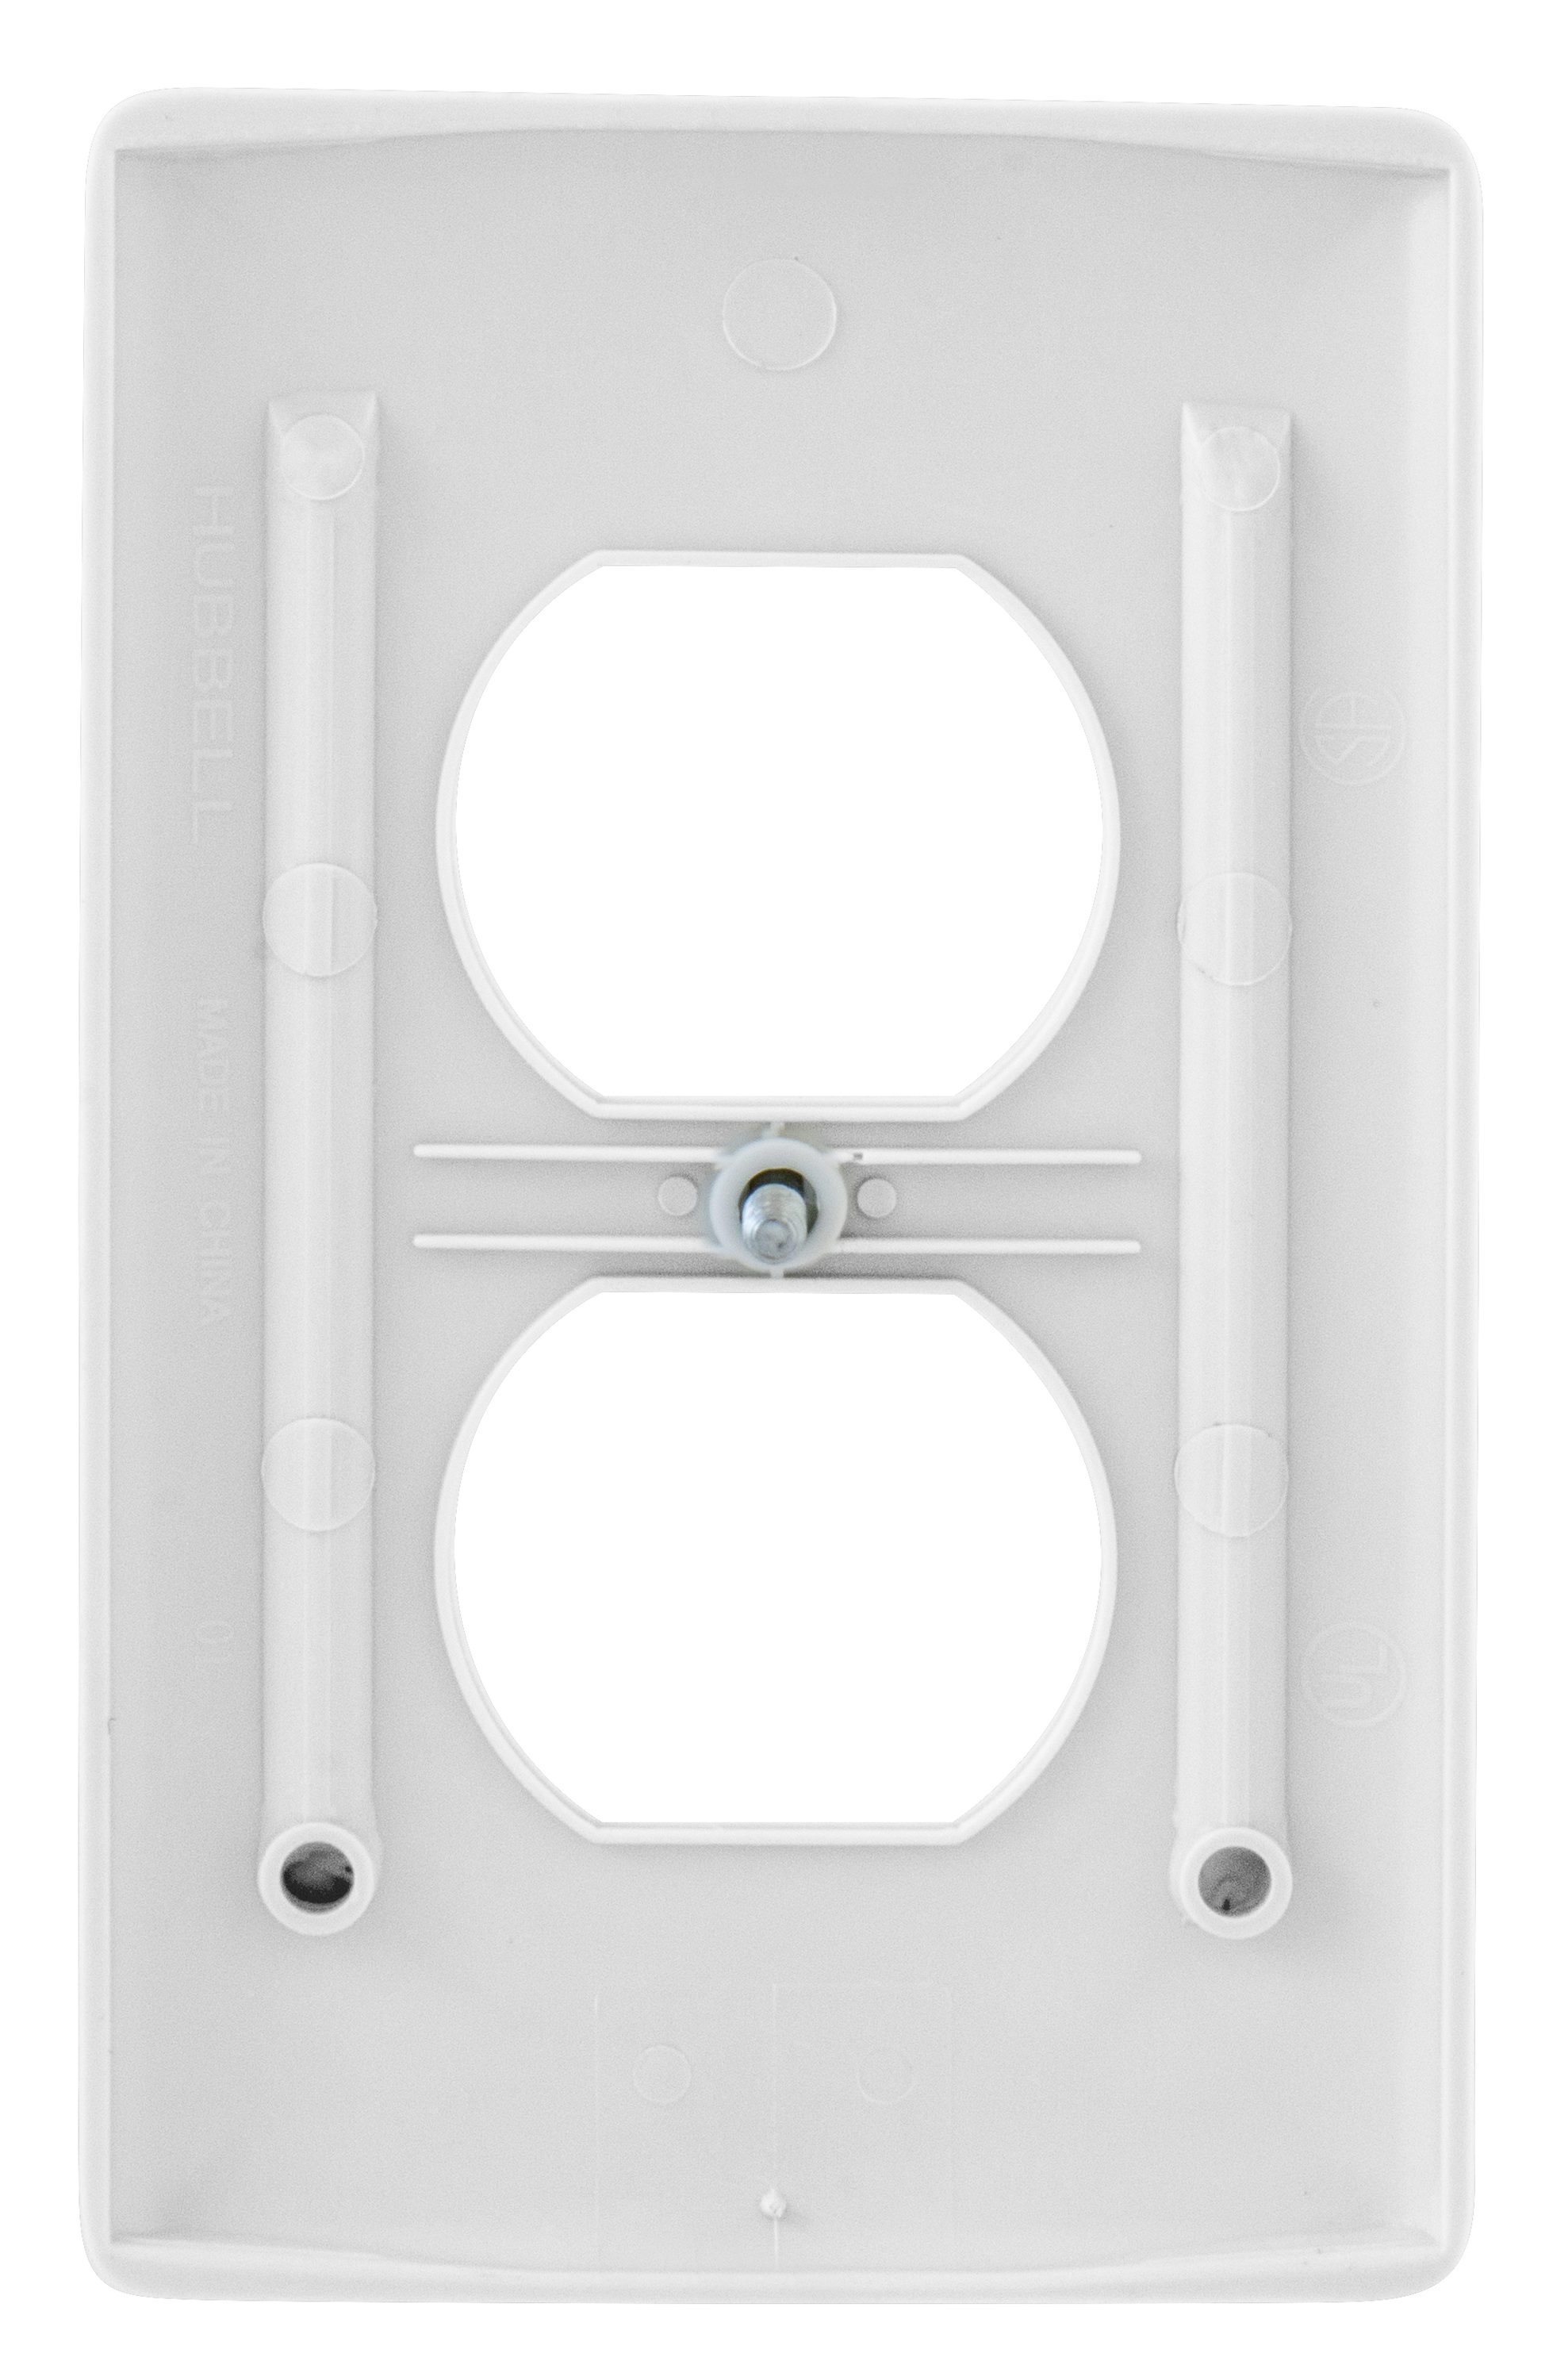 Set Of 5 Hubbell Ivory Mid-Size 1 Gang Unbreakable Outlet Plate Cover P7679 